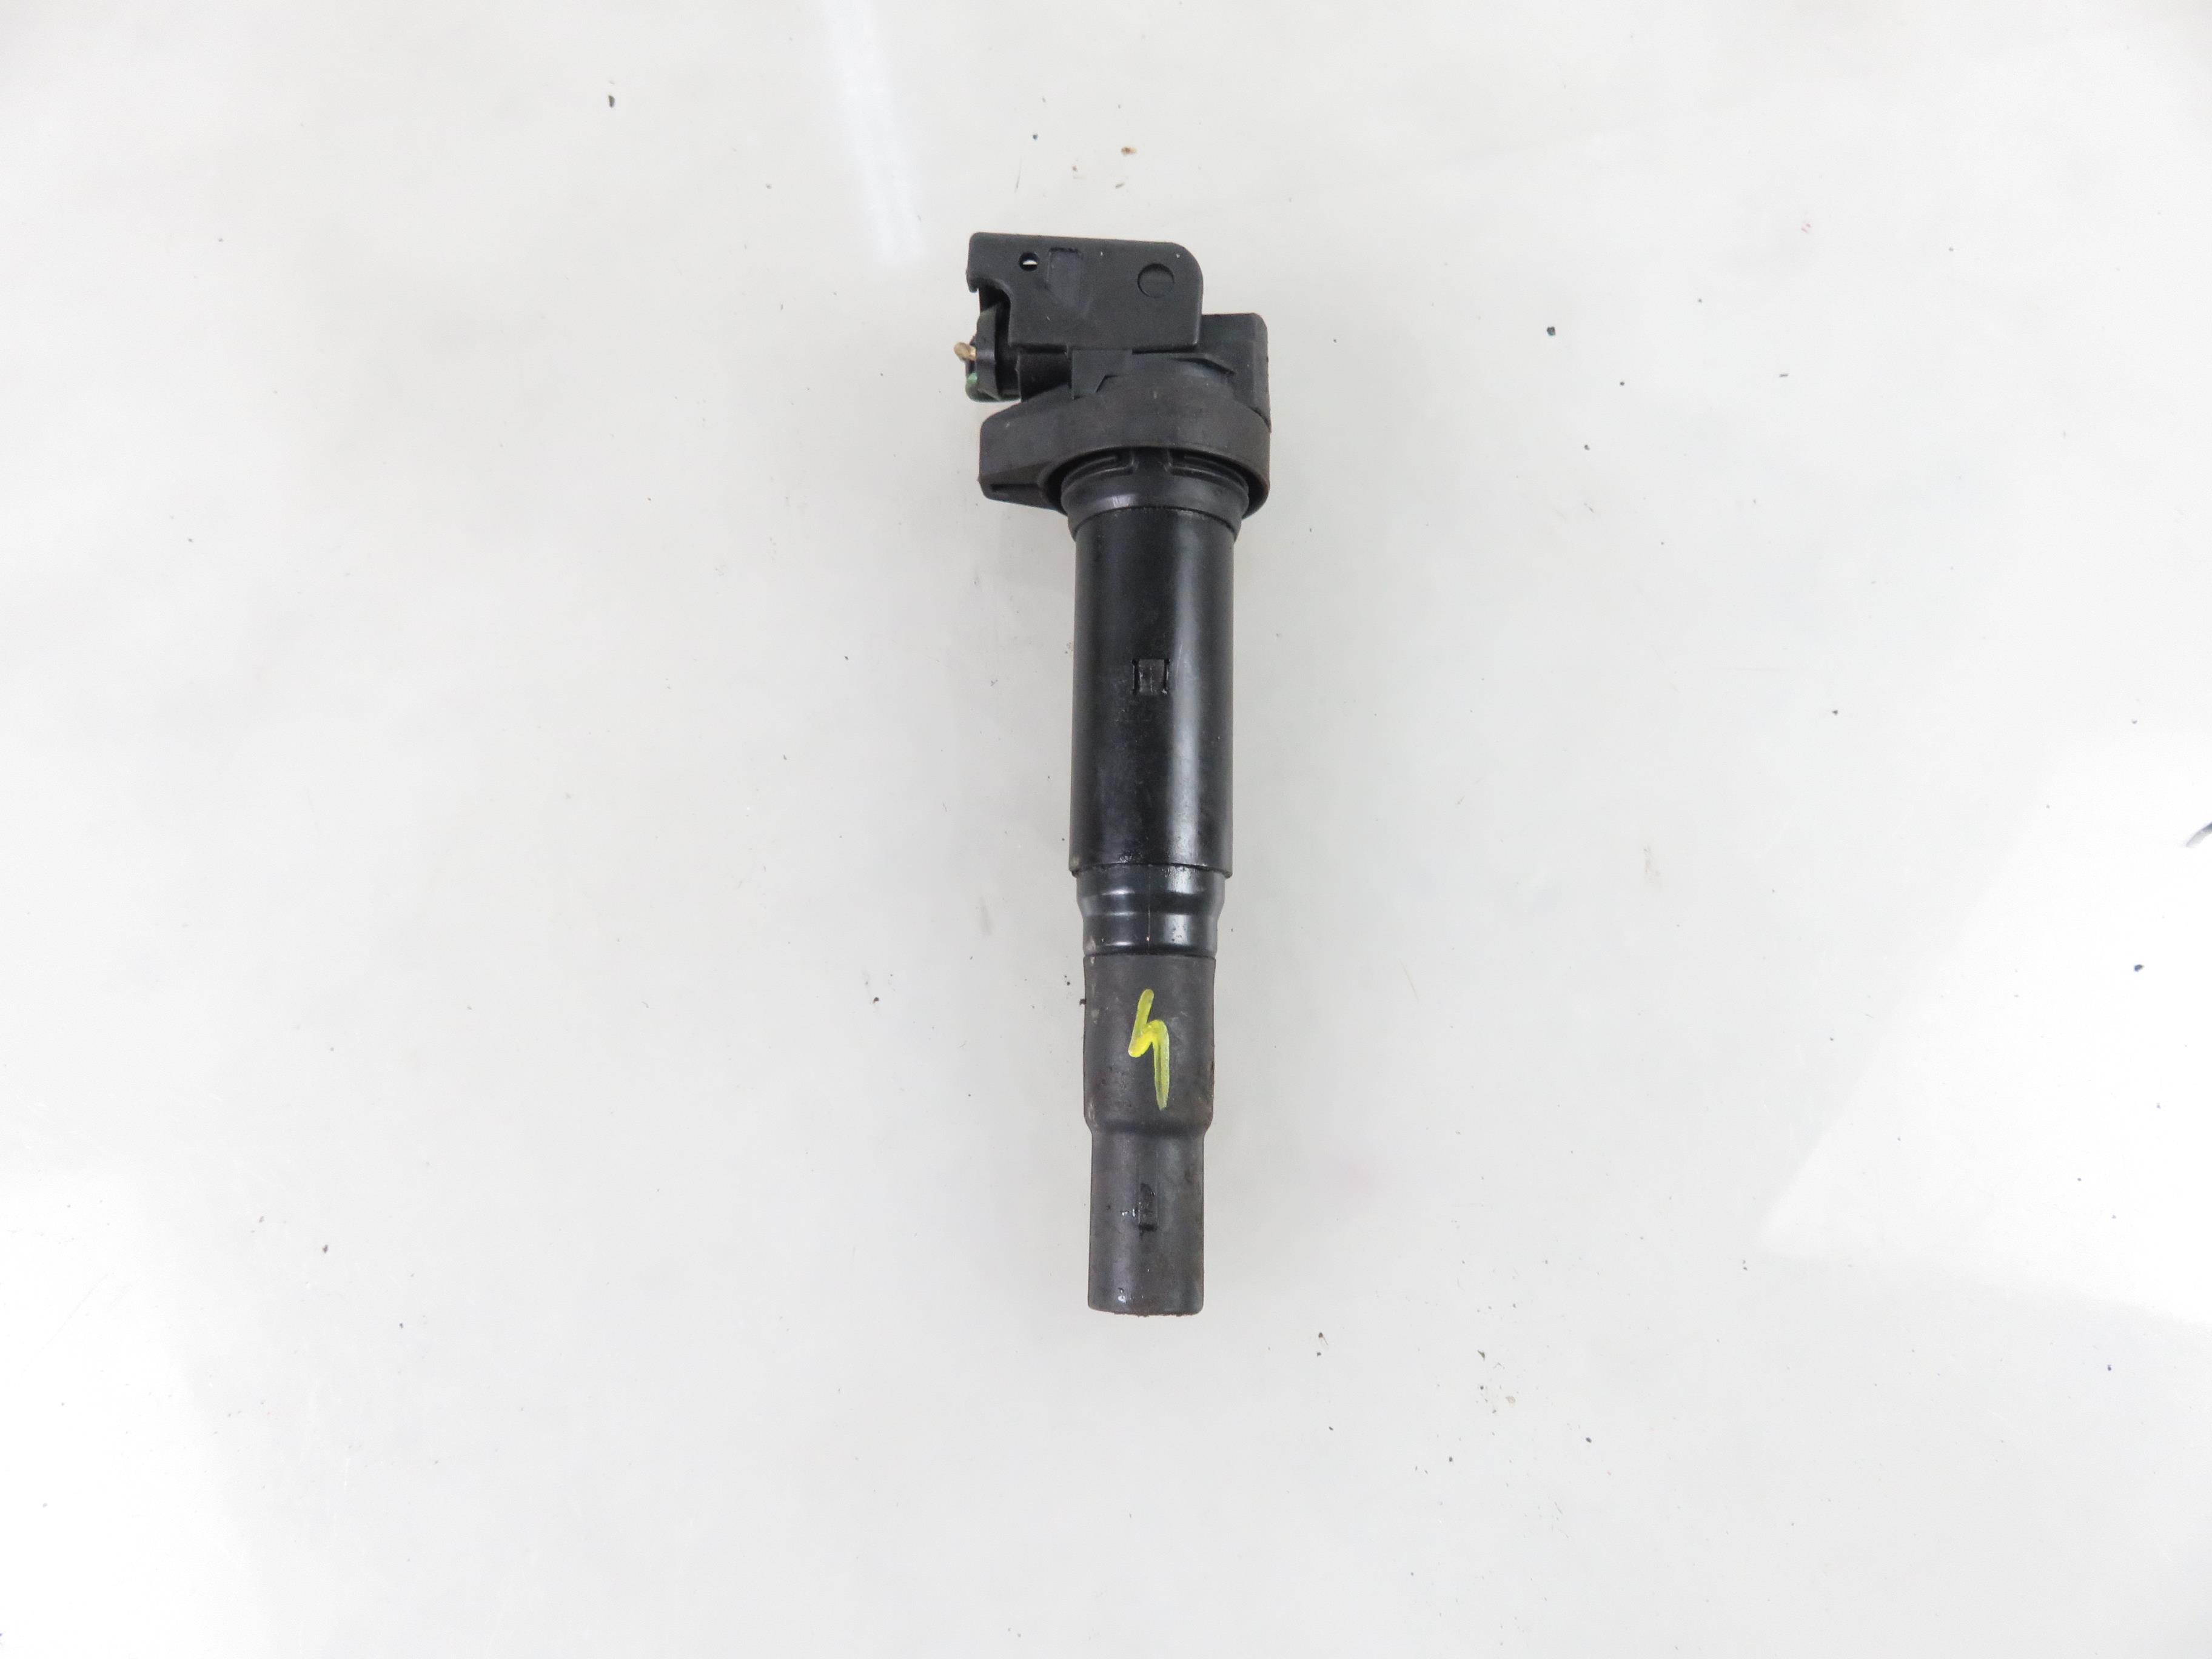 PEUGEOT 207 1 generation (2006-2009) High Voltage Ignition Coil E2019102143, ZSE143 24670143